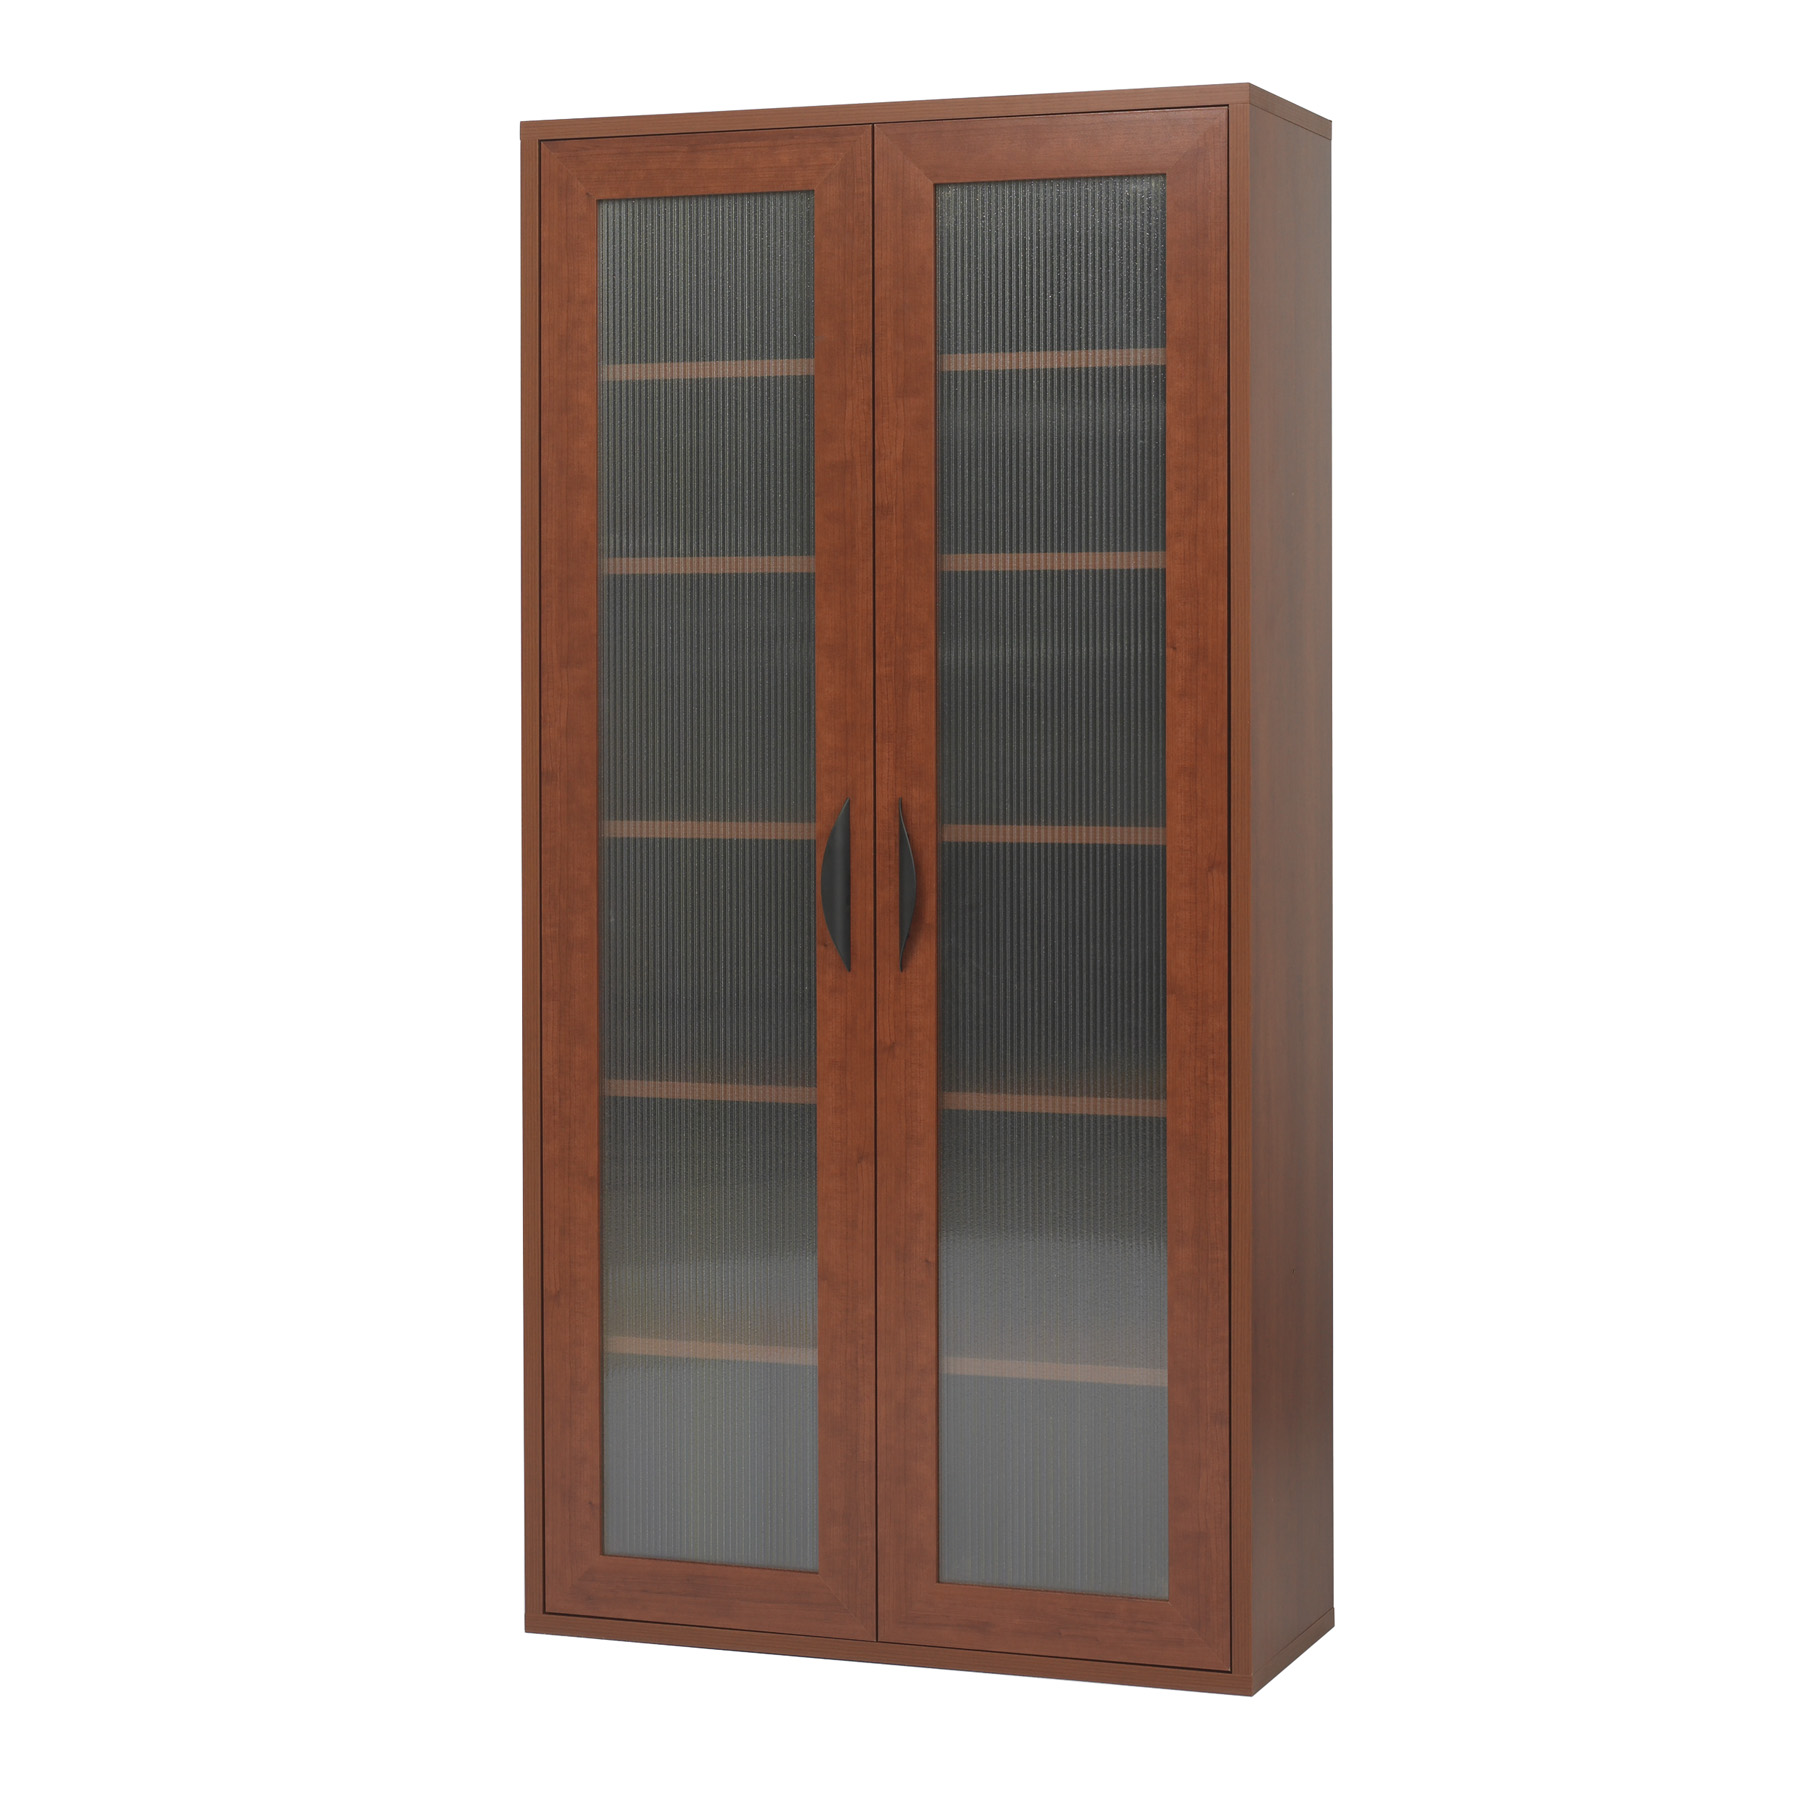 Apres Modular Storage Tall Cabinet Safco Products